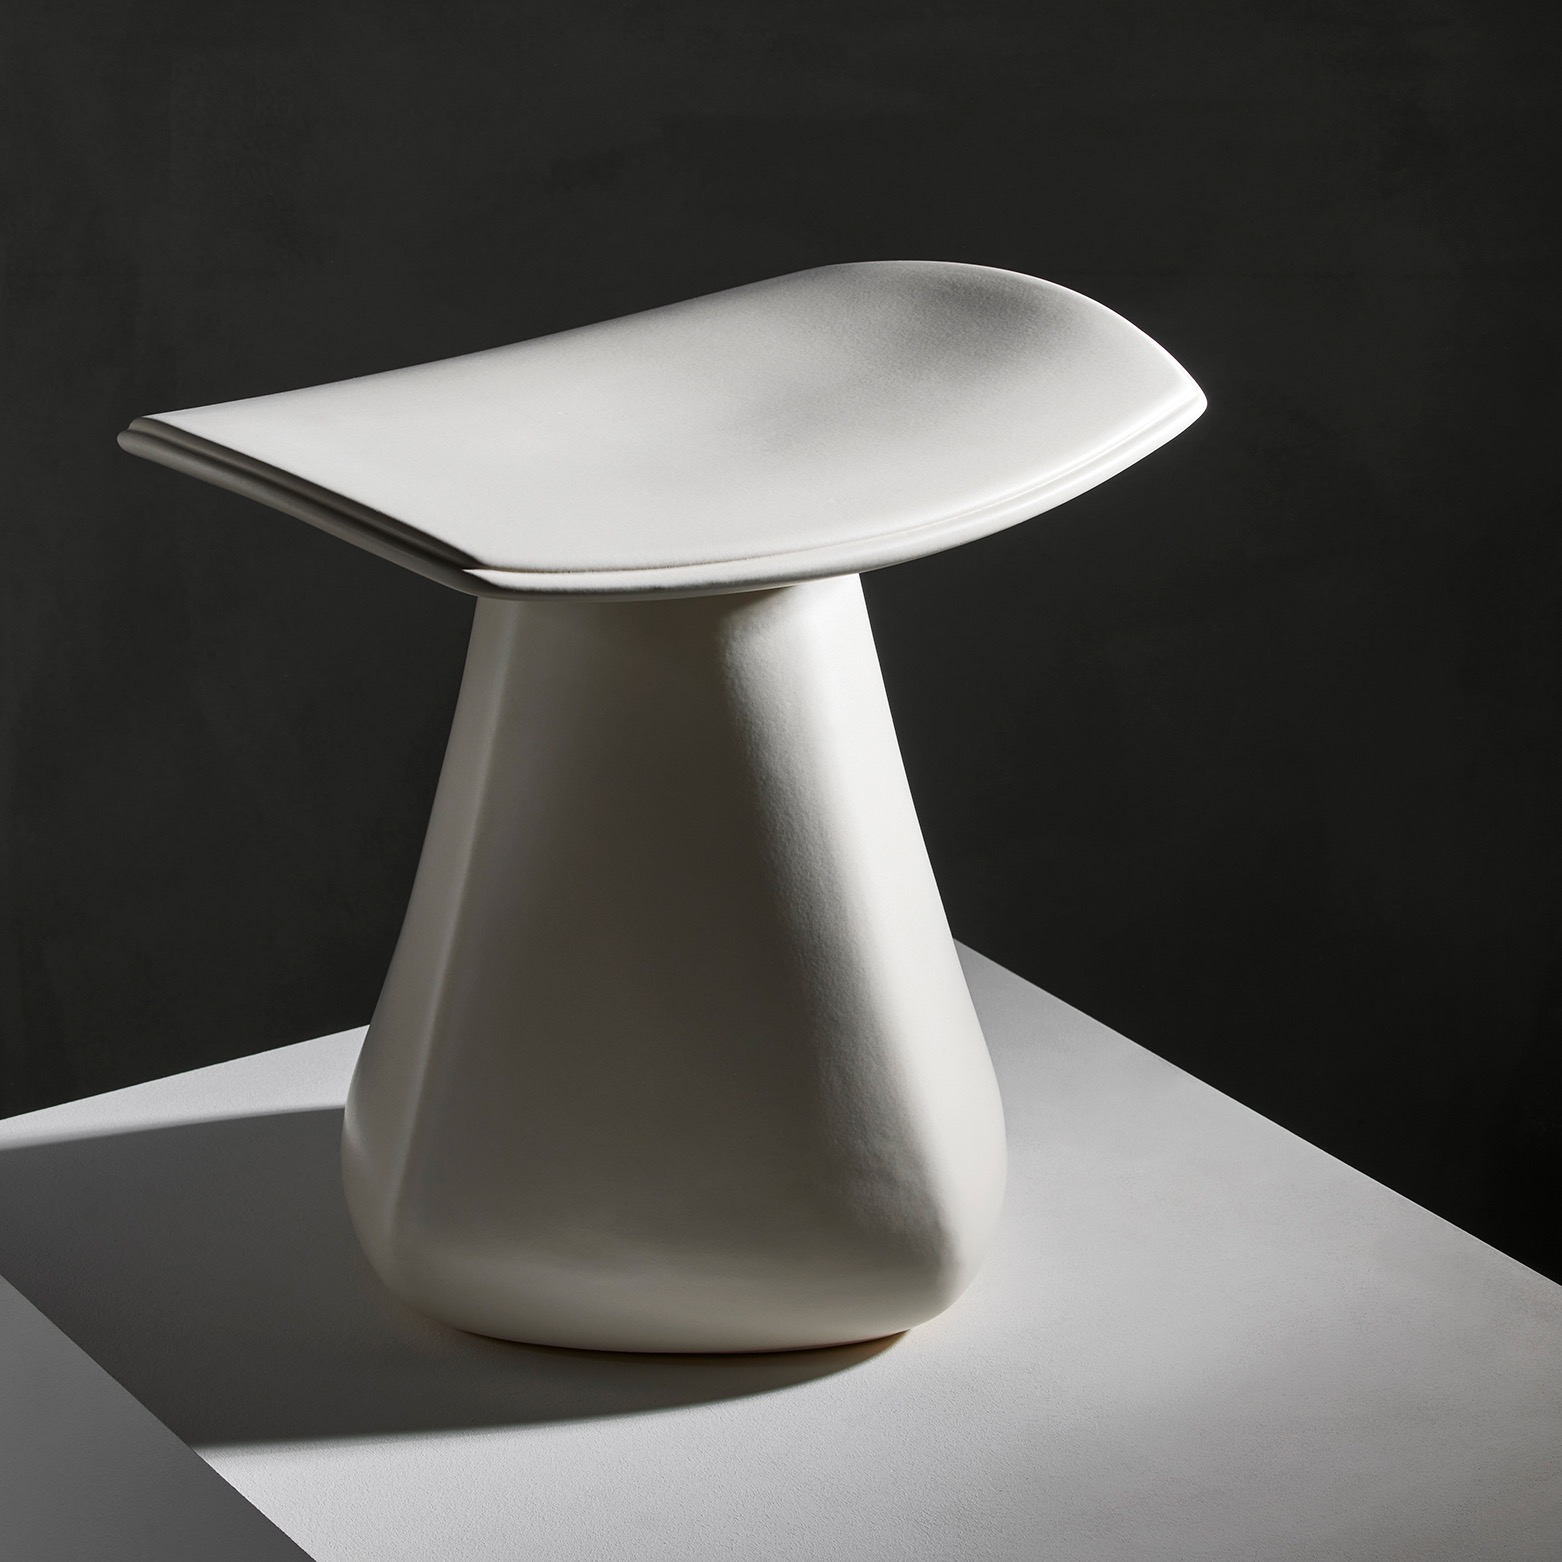 DAM_STOOL-WHITE-CERAMIC-C_DELCOURT_COLLECTION_PARTICULIERE-CREDIT_PHOTO-F_AMIAND